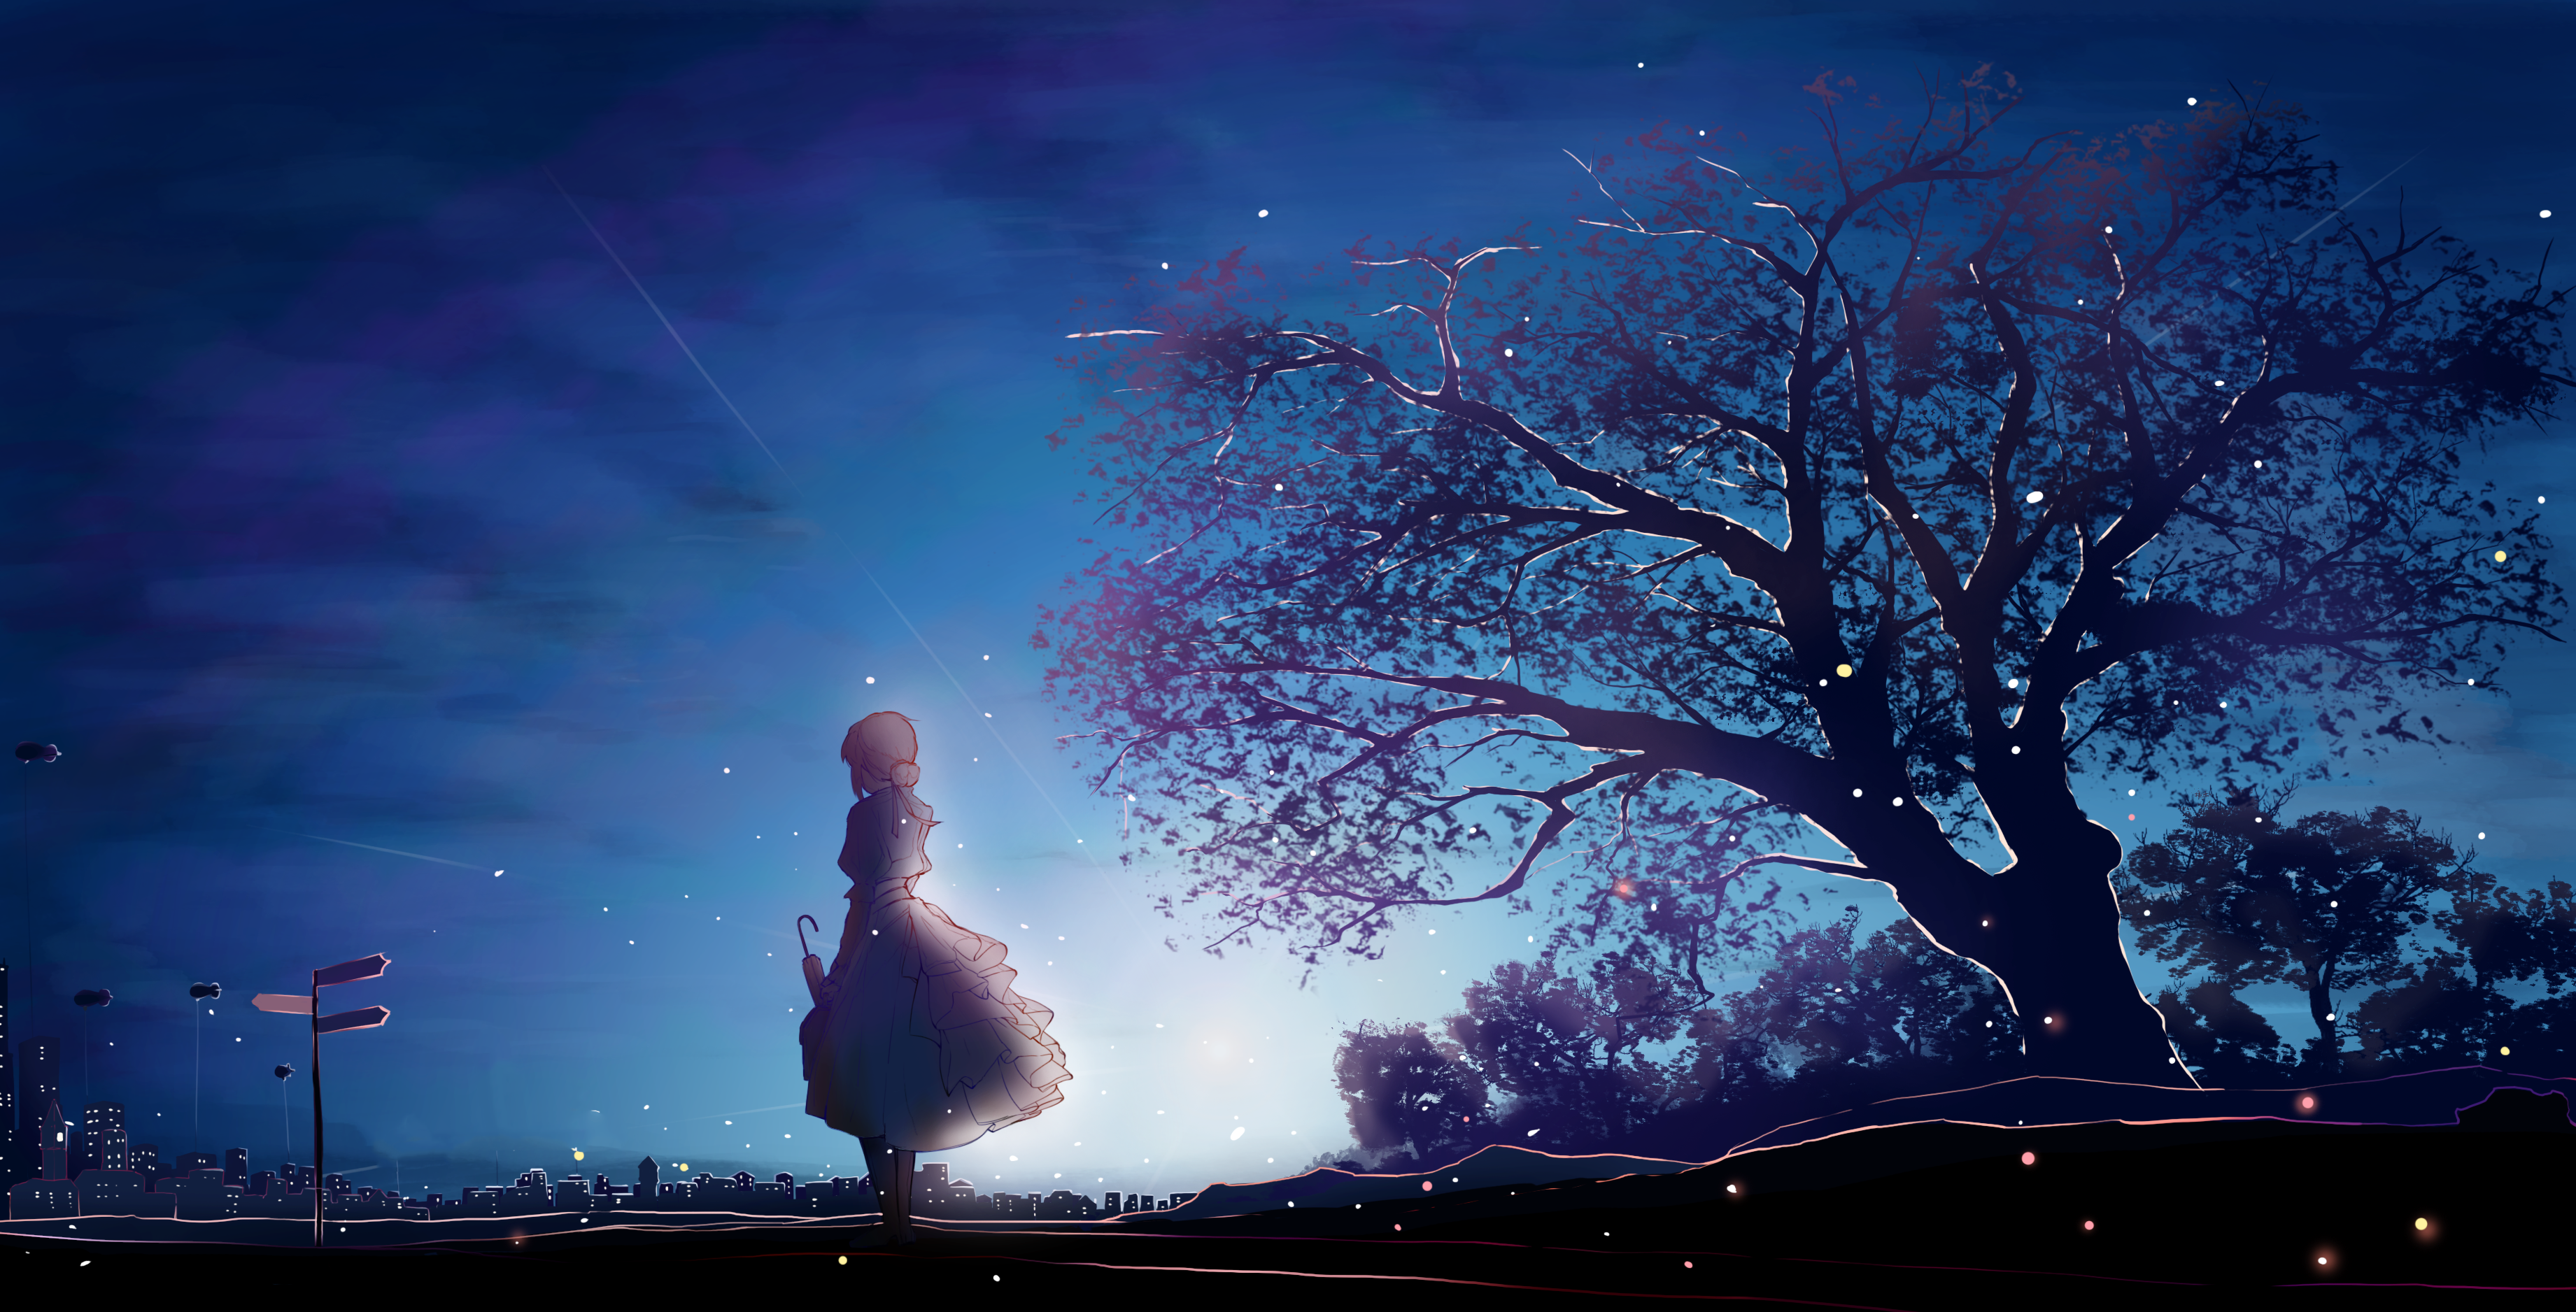 Anime 3682x1876 anime anime girls Violet Evergarden short hair artwork umbrella cityscape night white dress blonde looking into the distance night sky clouds stars